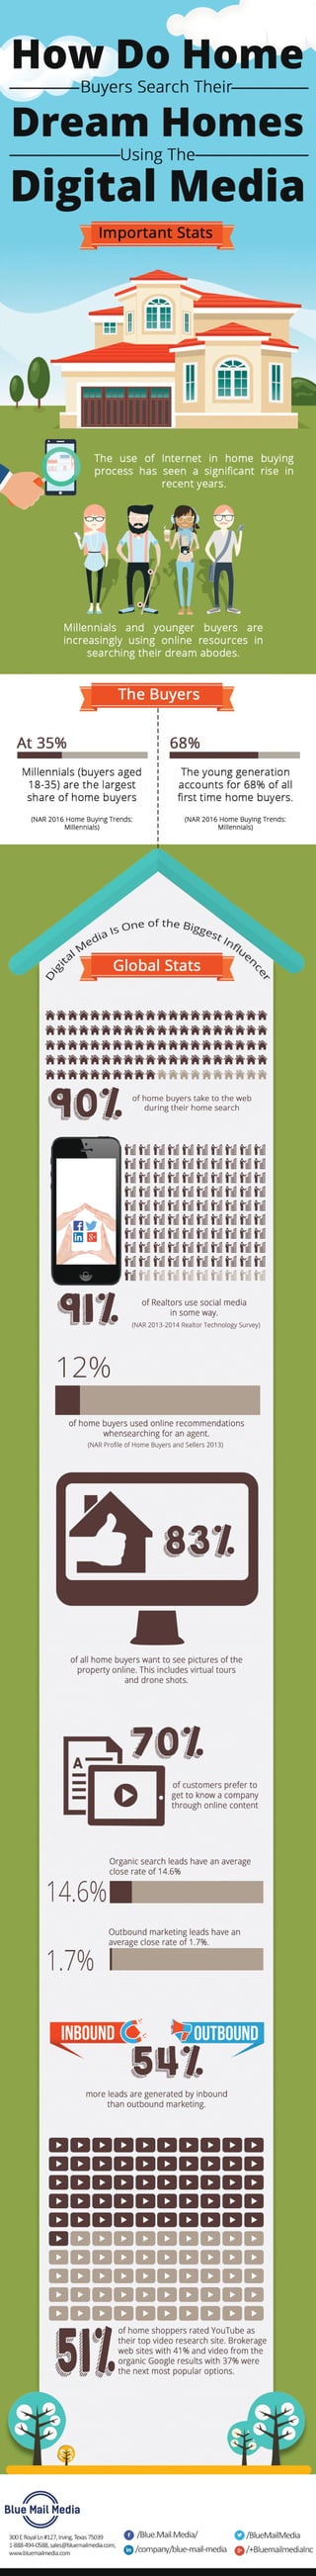 [Infographic] How Do Home Buyers Search Their Dream Homes Using the Digital Media 